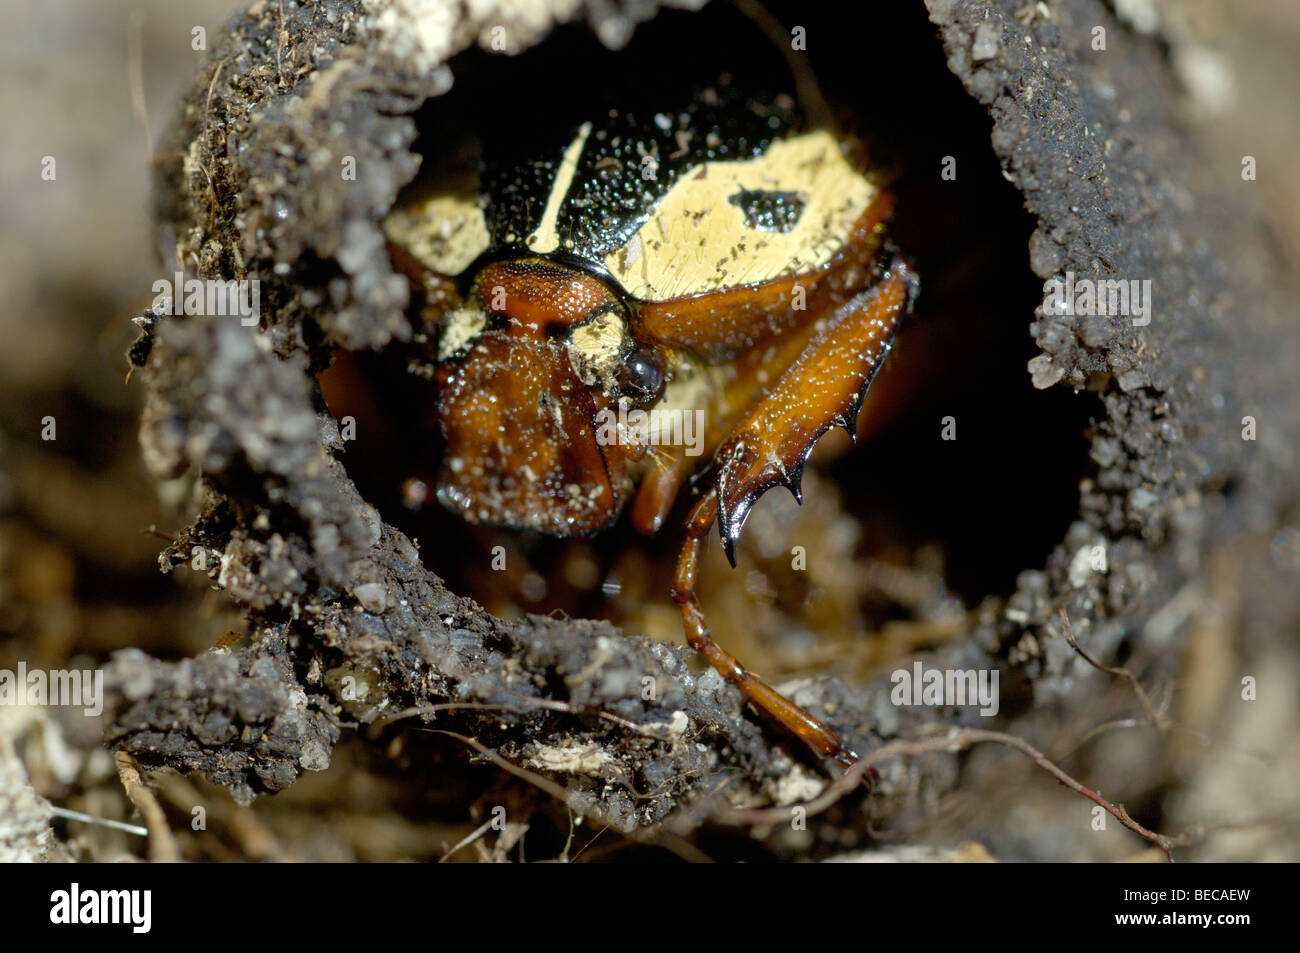 African Rose Beetle (Cheirolasia burkei) hatching from a cocoon Stock Photo